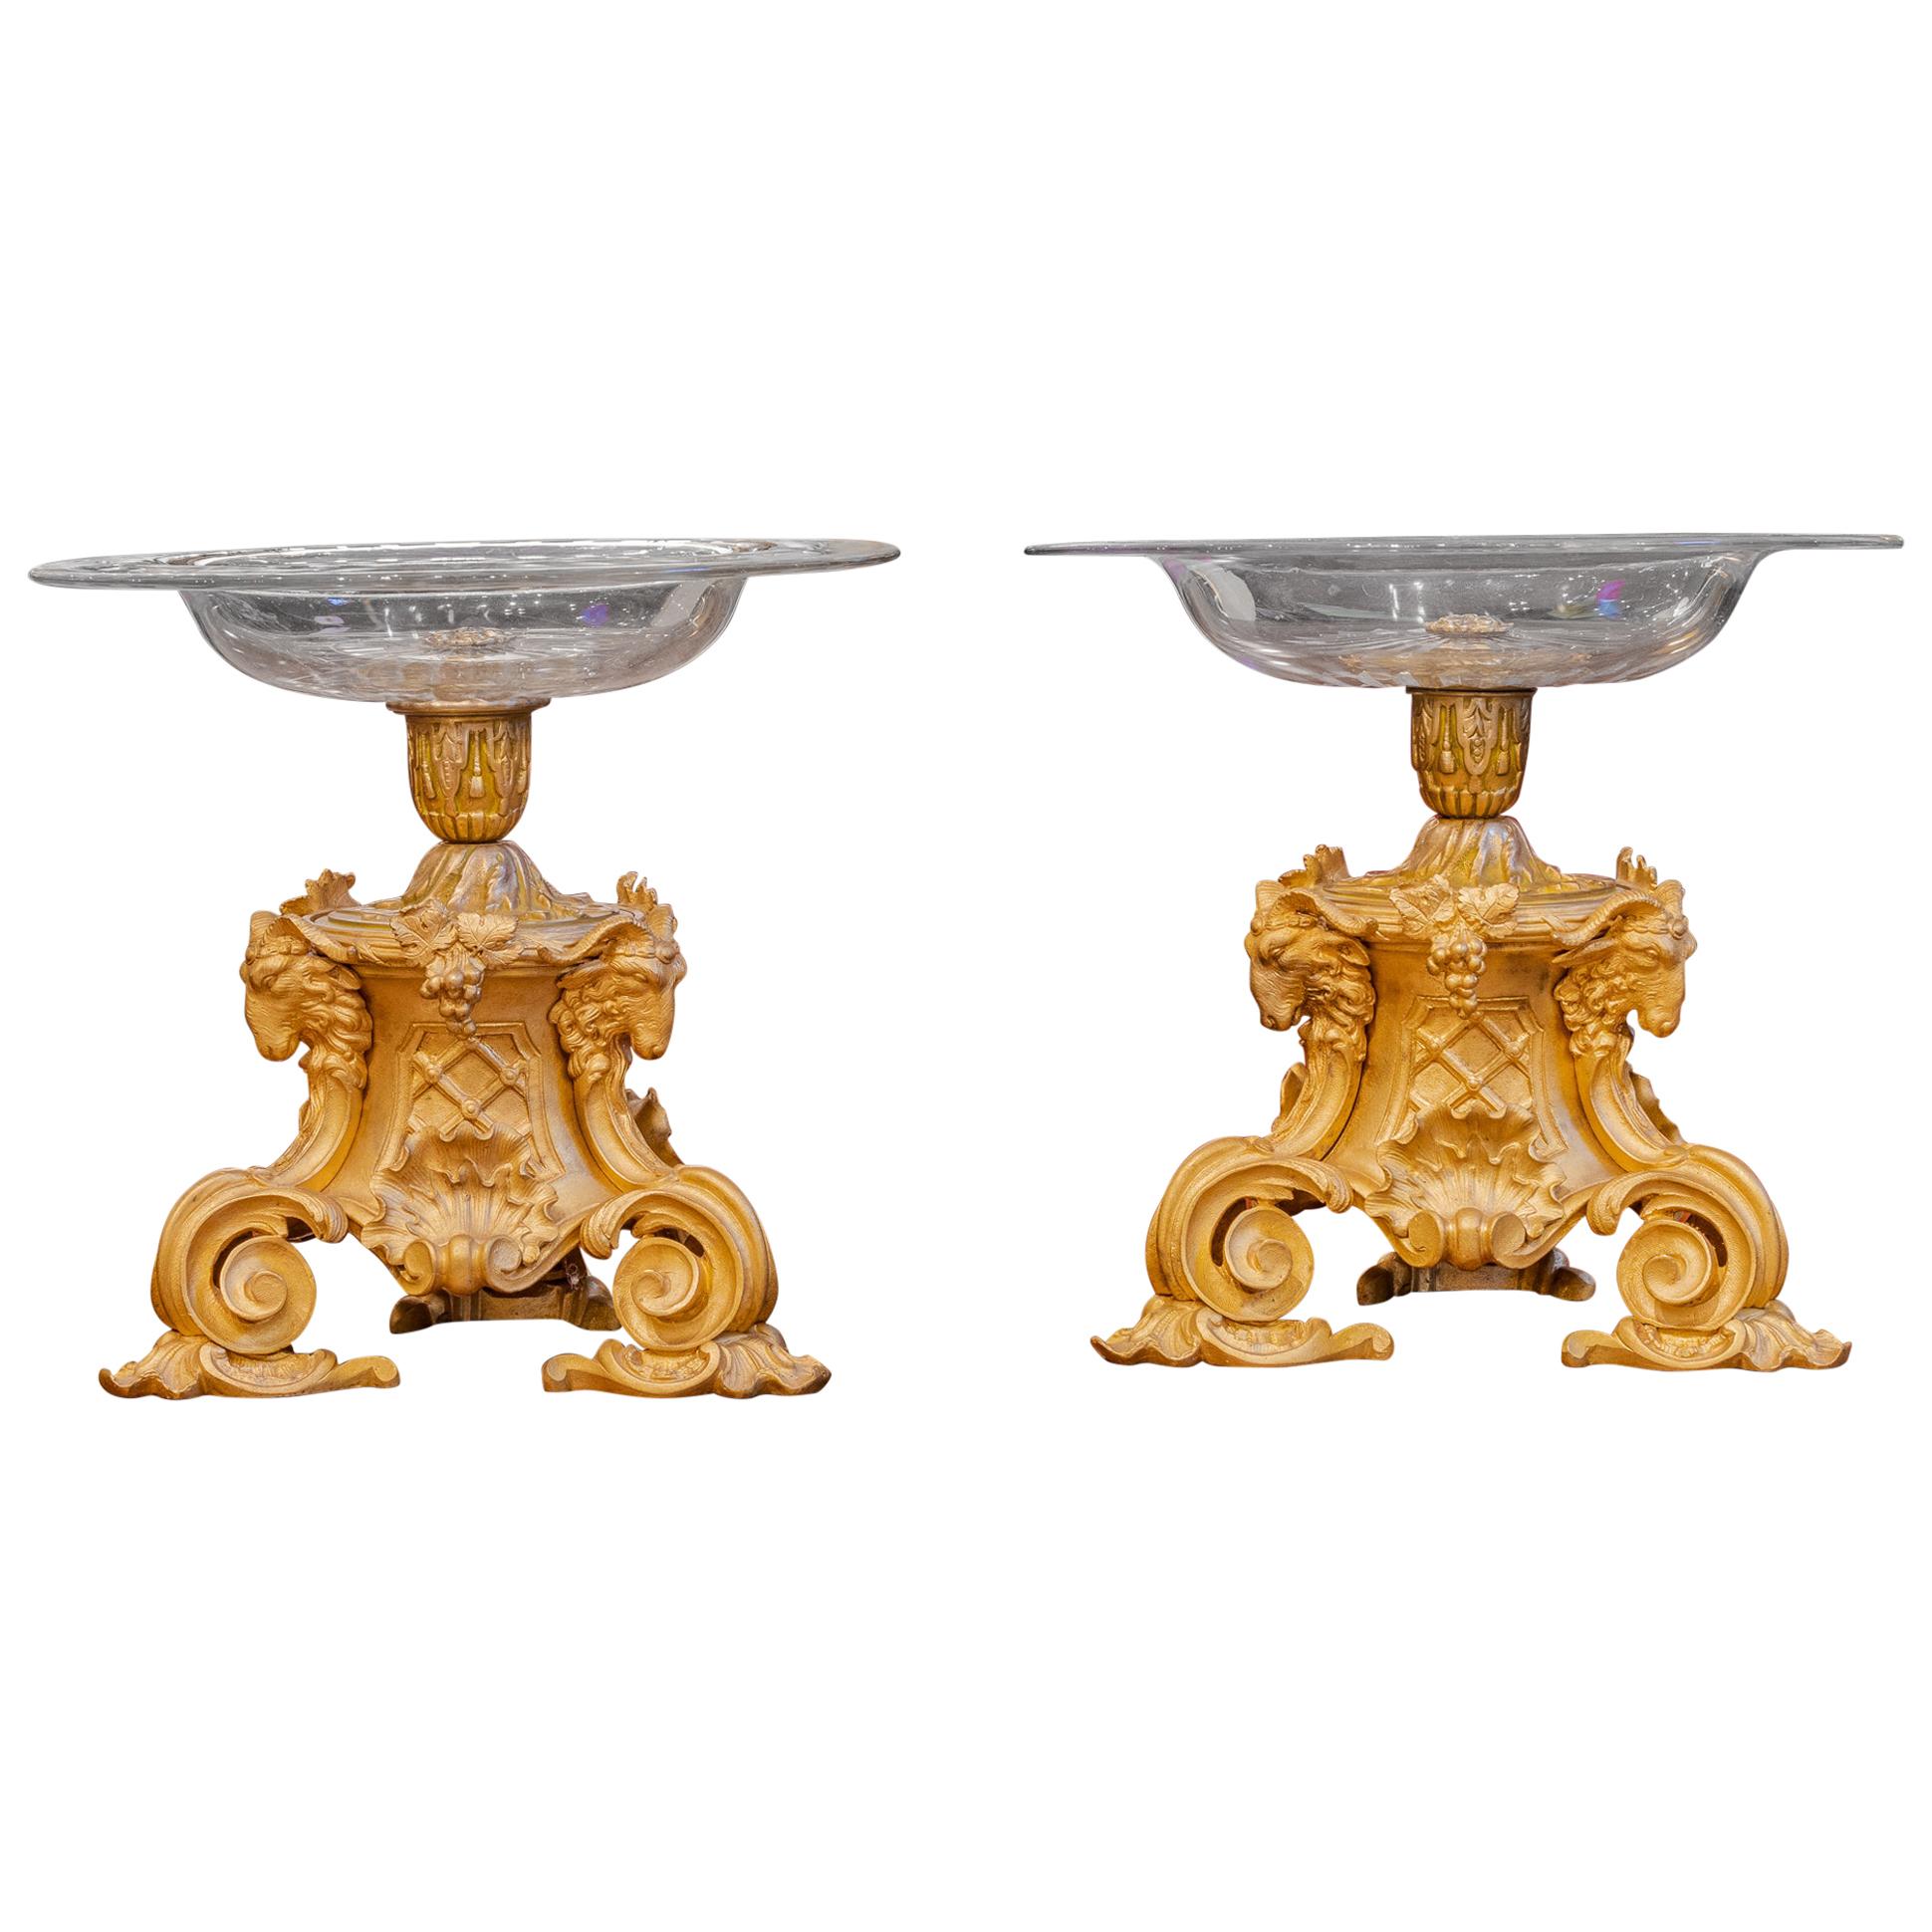 Fine Pair of French 19th Century Louis XVI Gilt Bronze and Crystal Candy Dishes